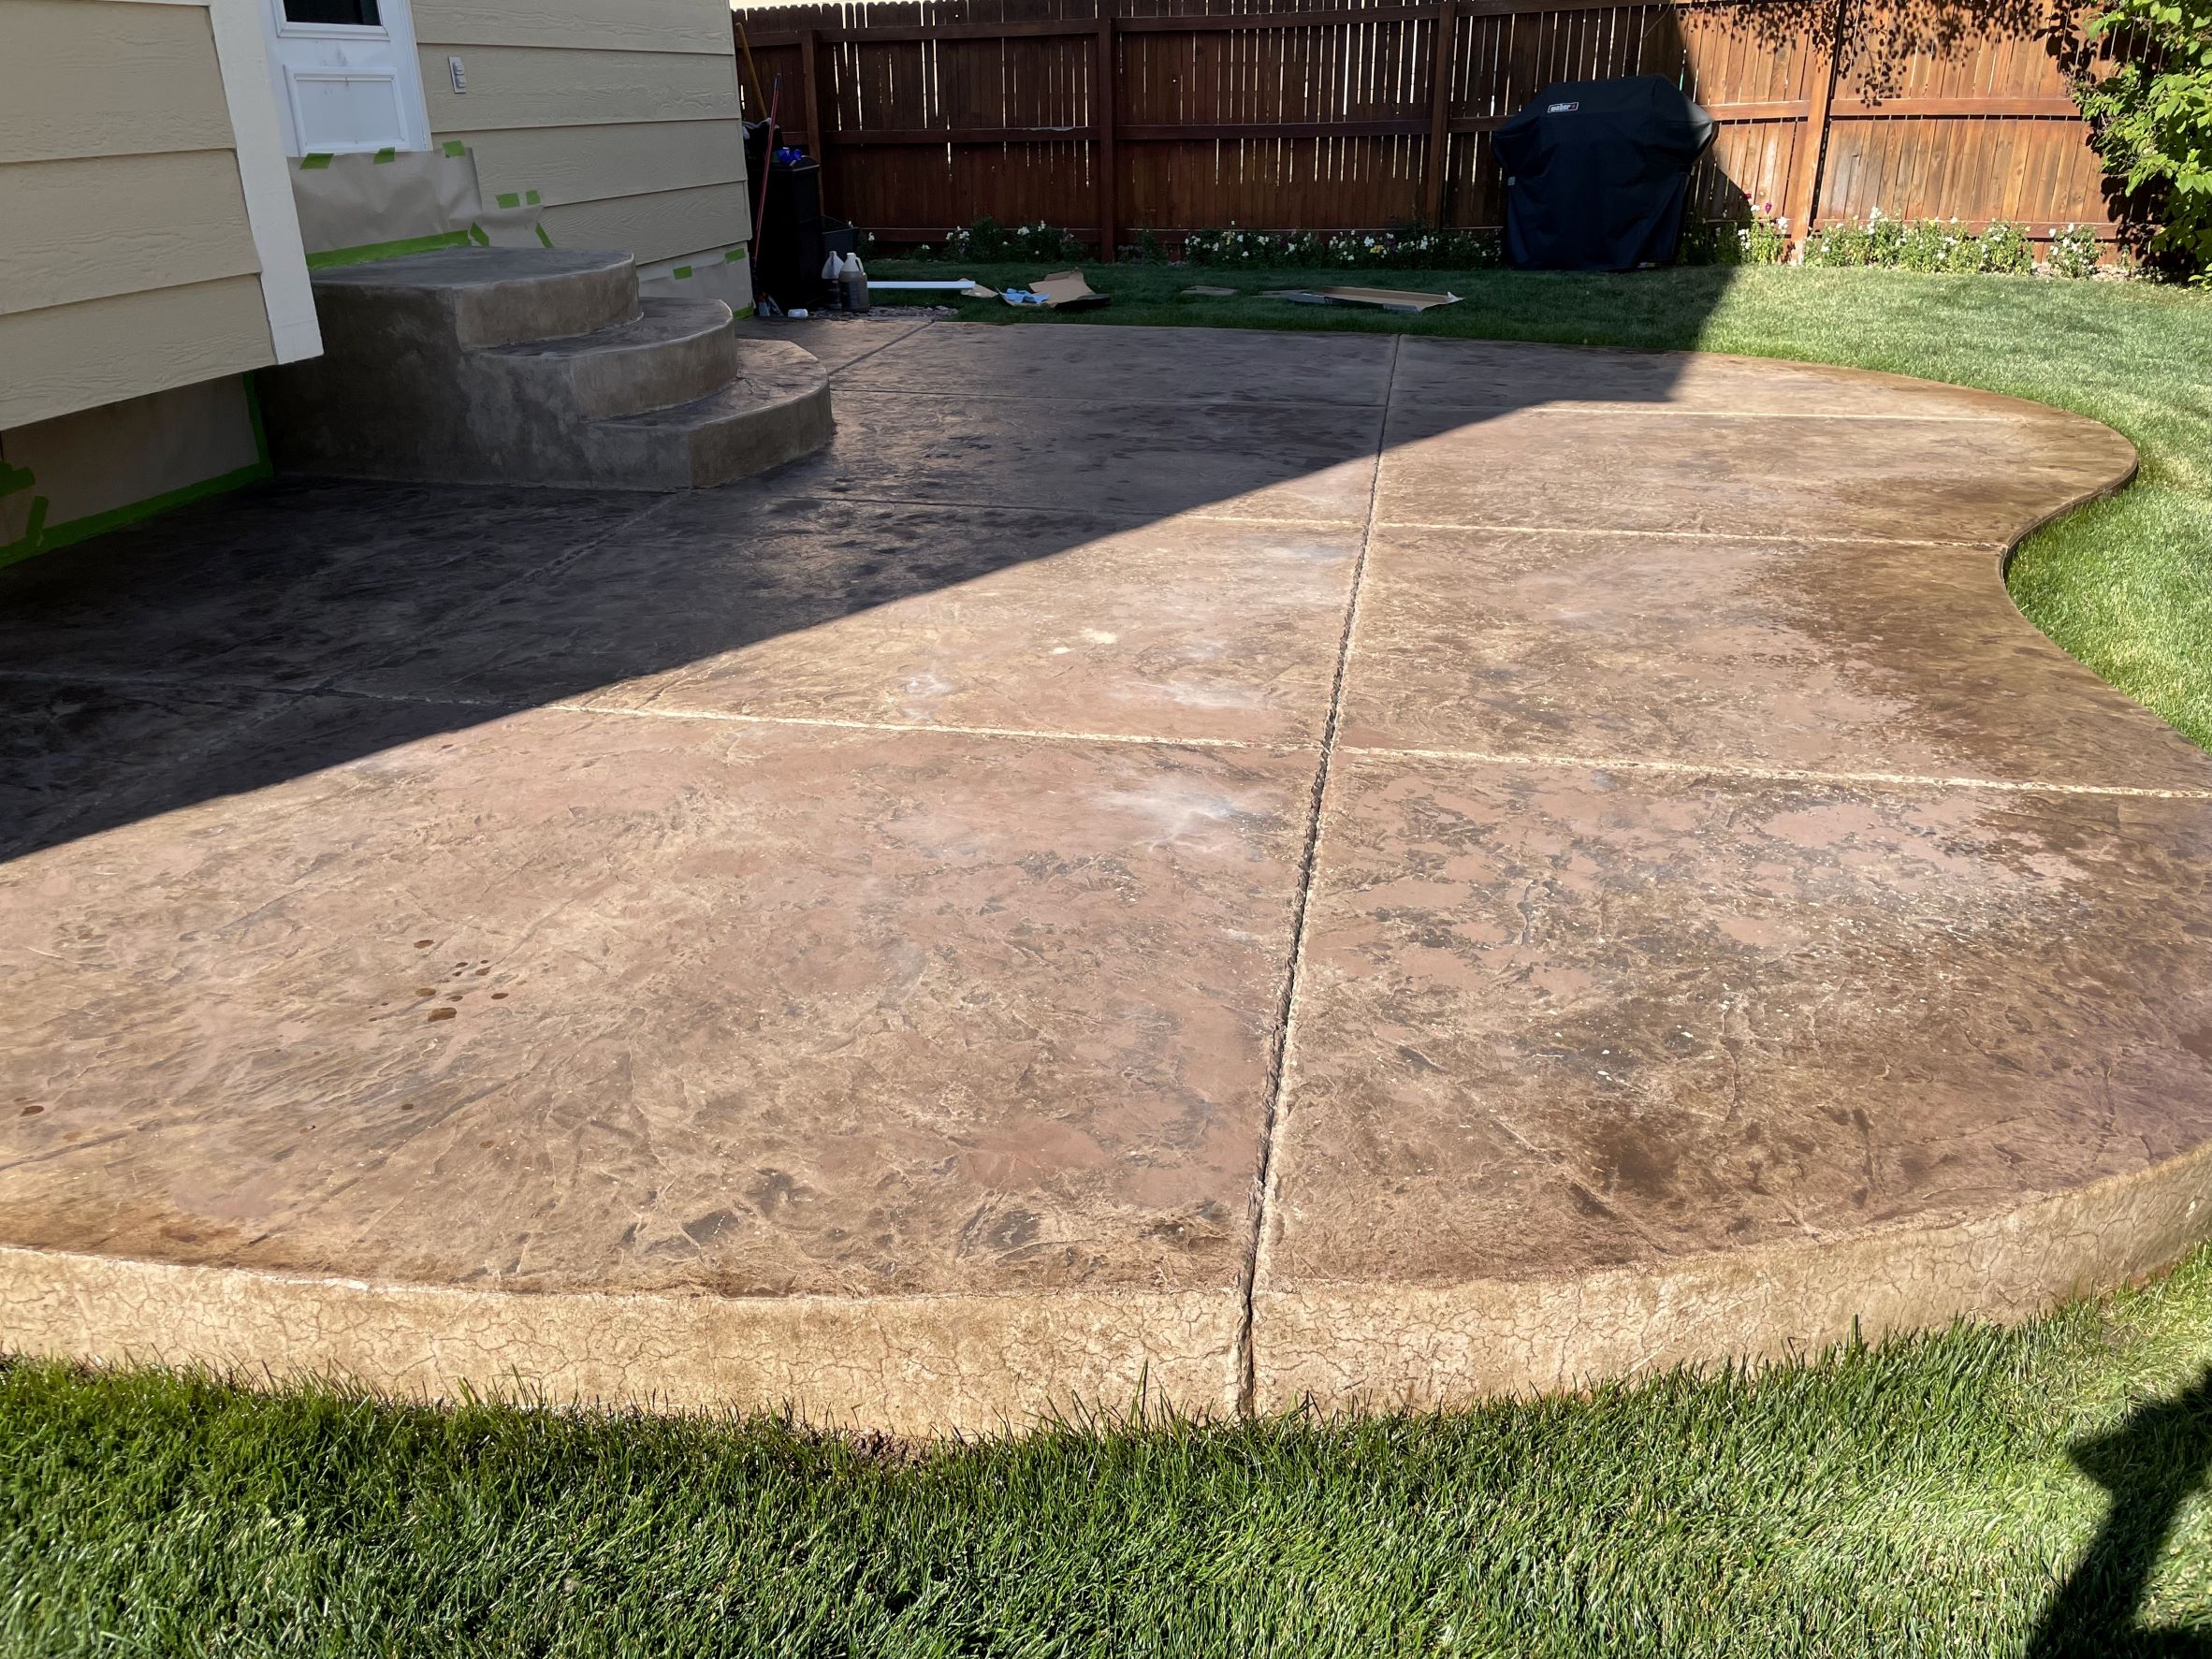 Faded stamped concrete patio